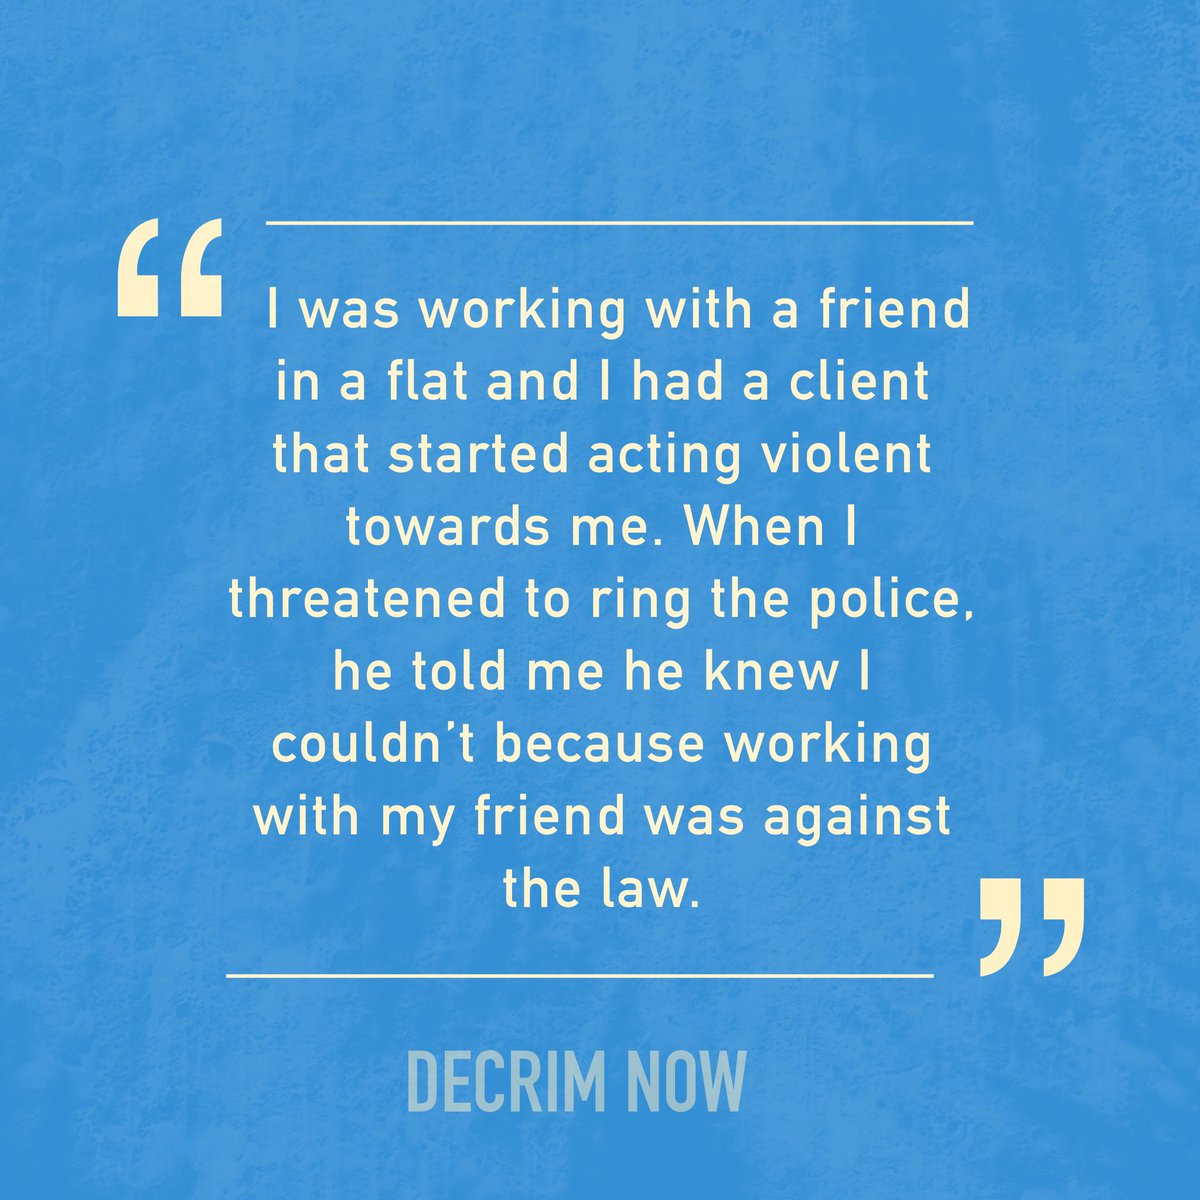 Under the Nordic Model’s strict brothel keeping laws, indoor sex workers are criminalised when working together for safety. 85% of those convicted in Ireland for ‘brothel keeping’ in recent years were migrant women. We need full decriminalisation now. (4/12)